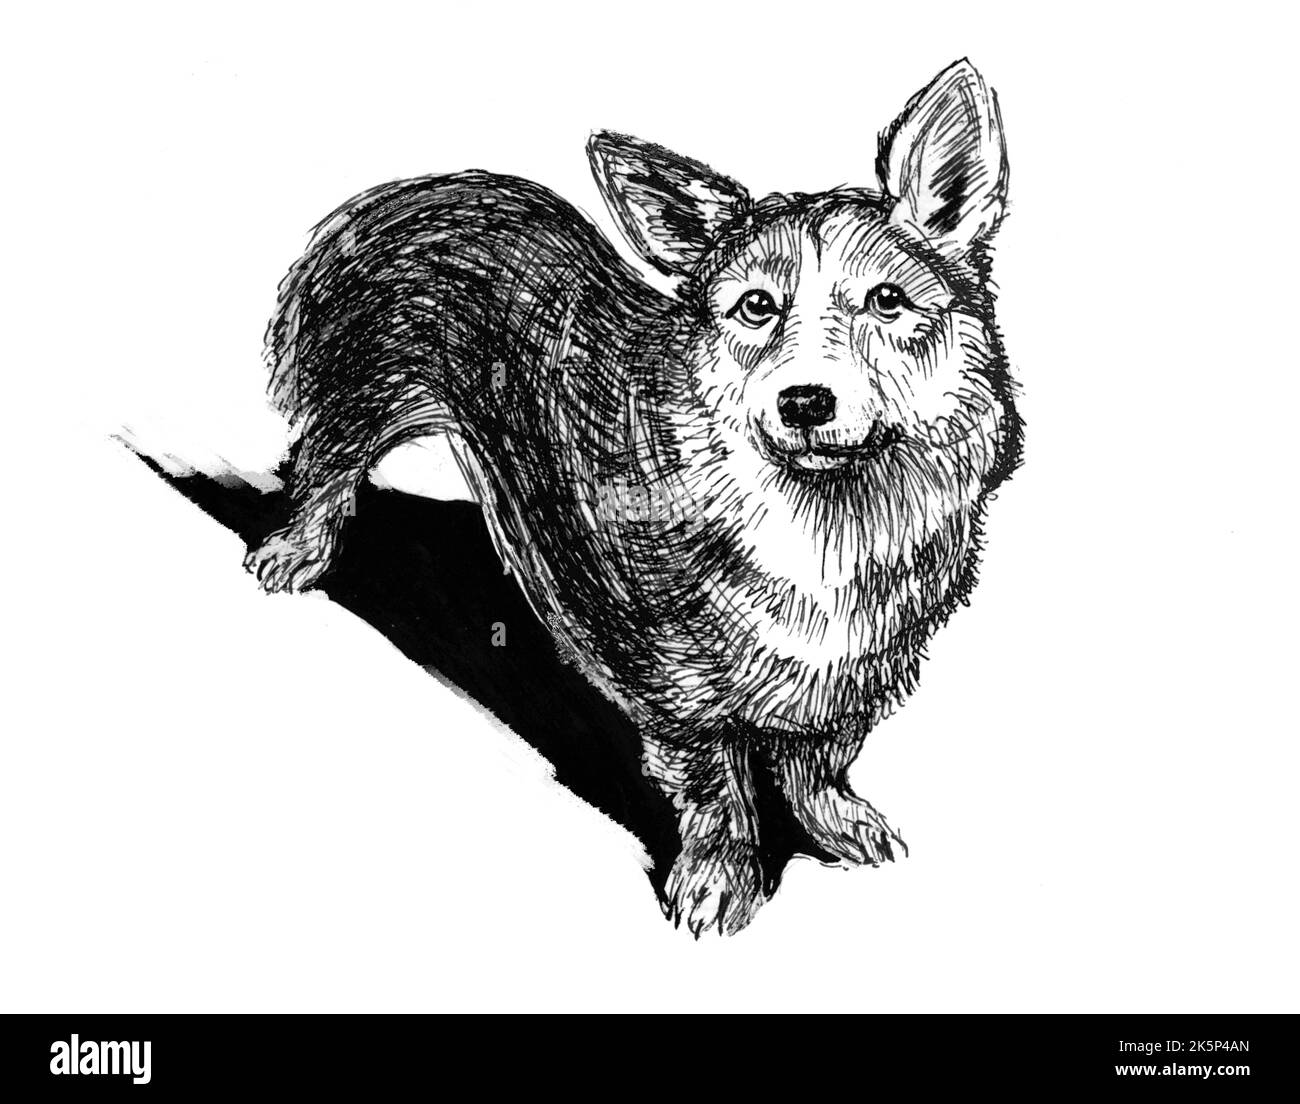 Corgi dog - illustration made with a pen, black and white drawing. Cute dog in a gentle perspective. Portrait of the whole silhouette. Drawing. Stock Photo